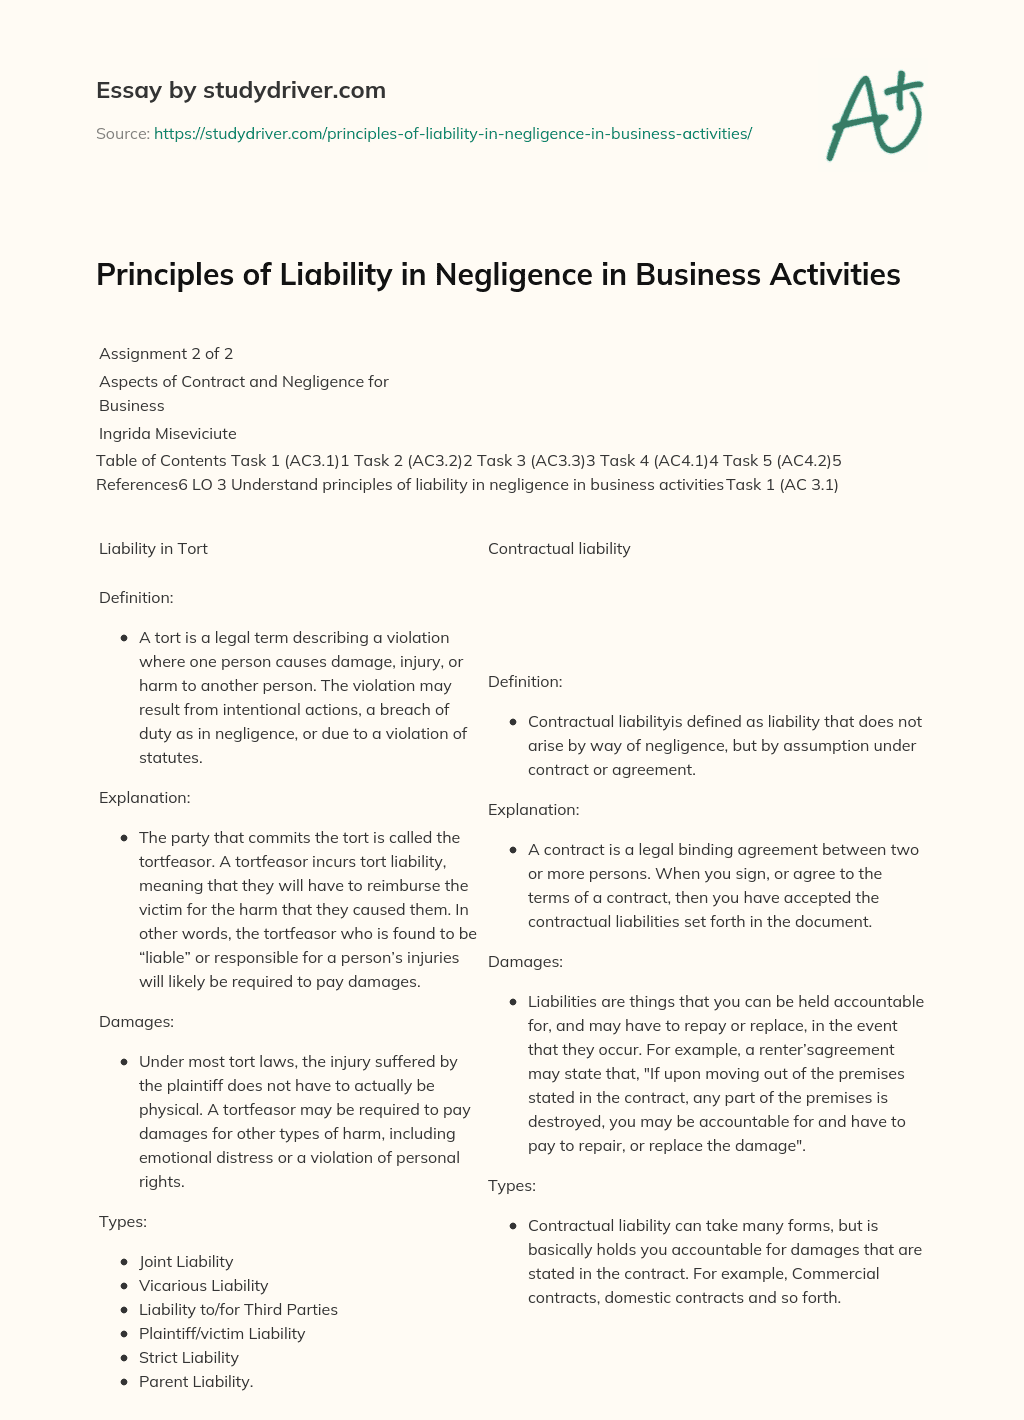 Principles of Liability in Negligence in Business Activities essay